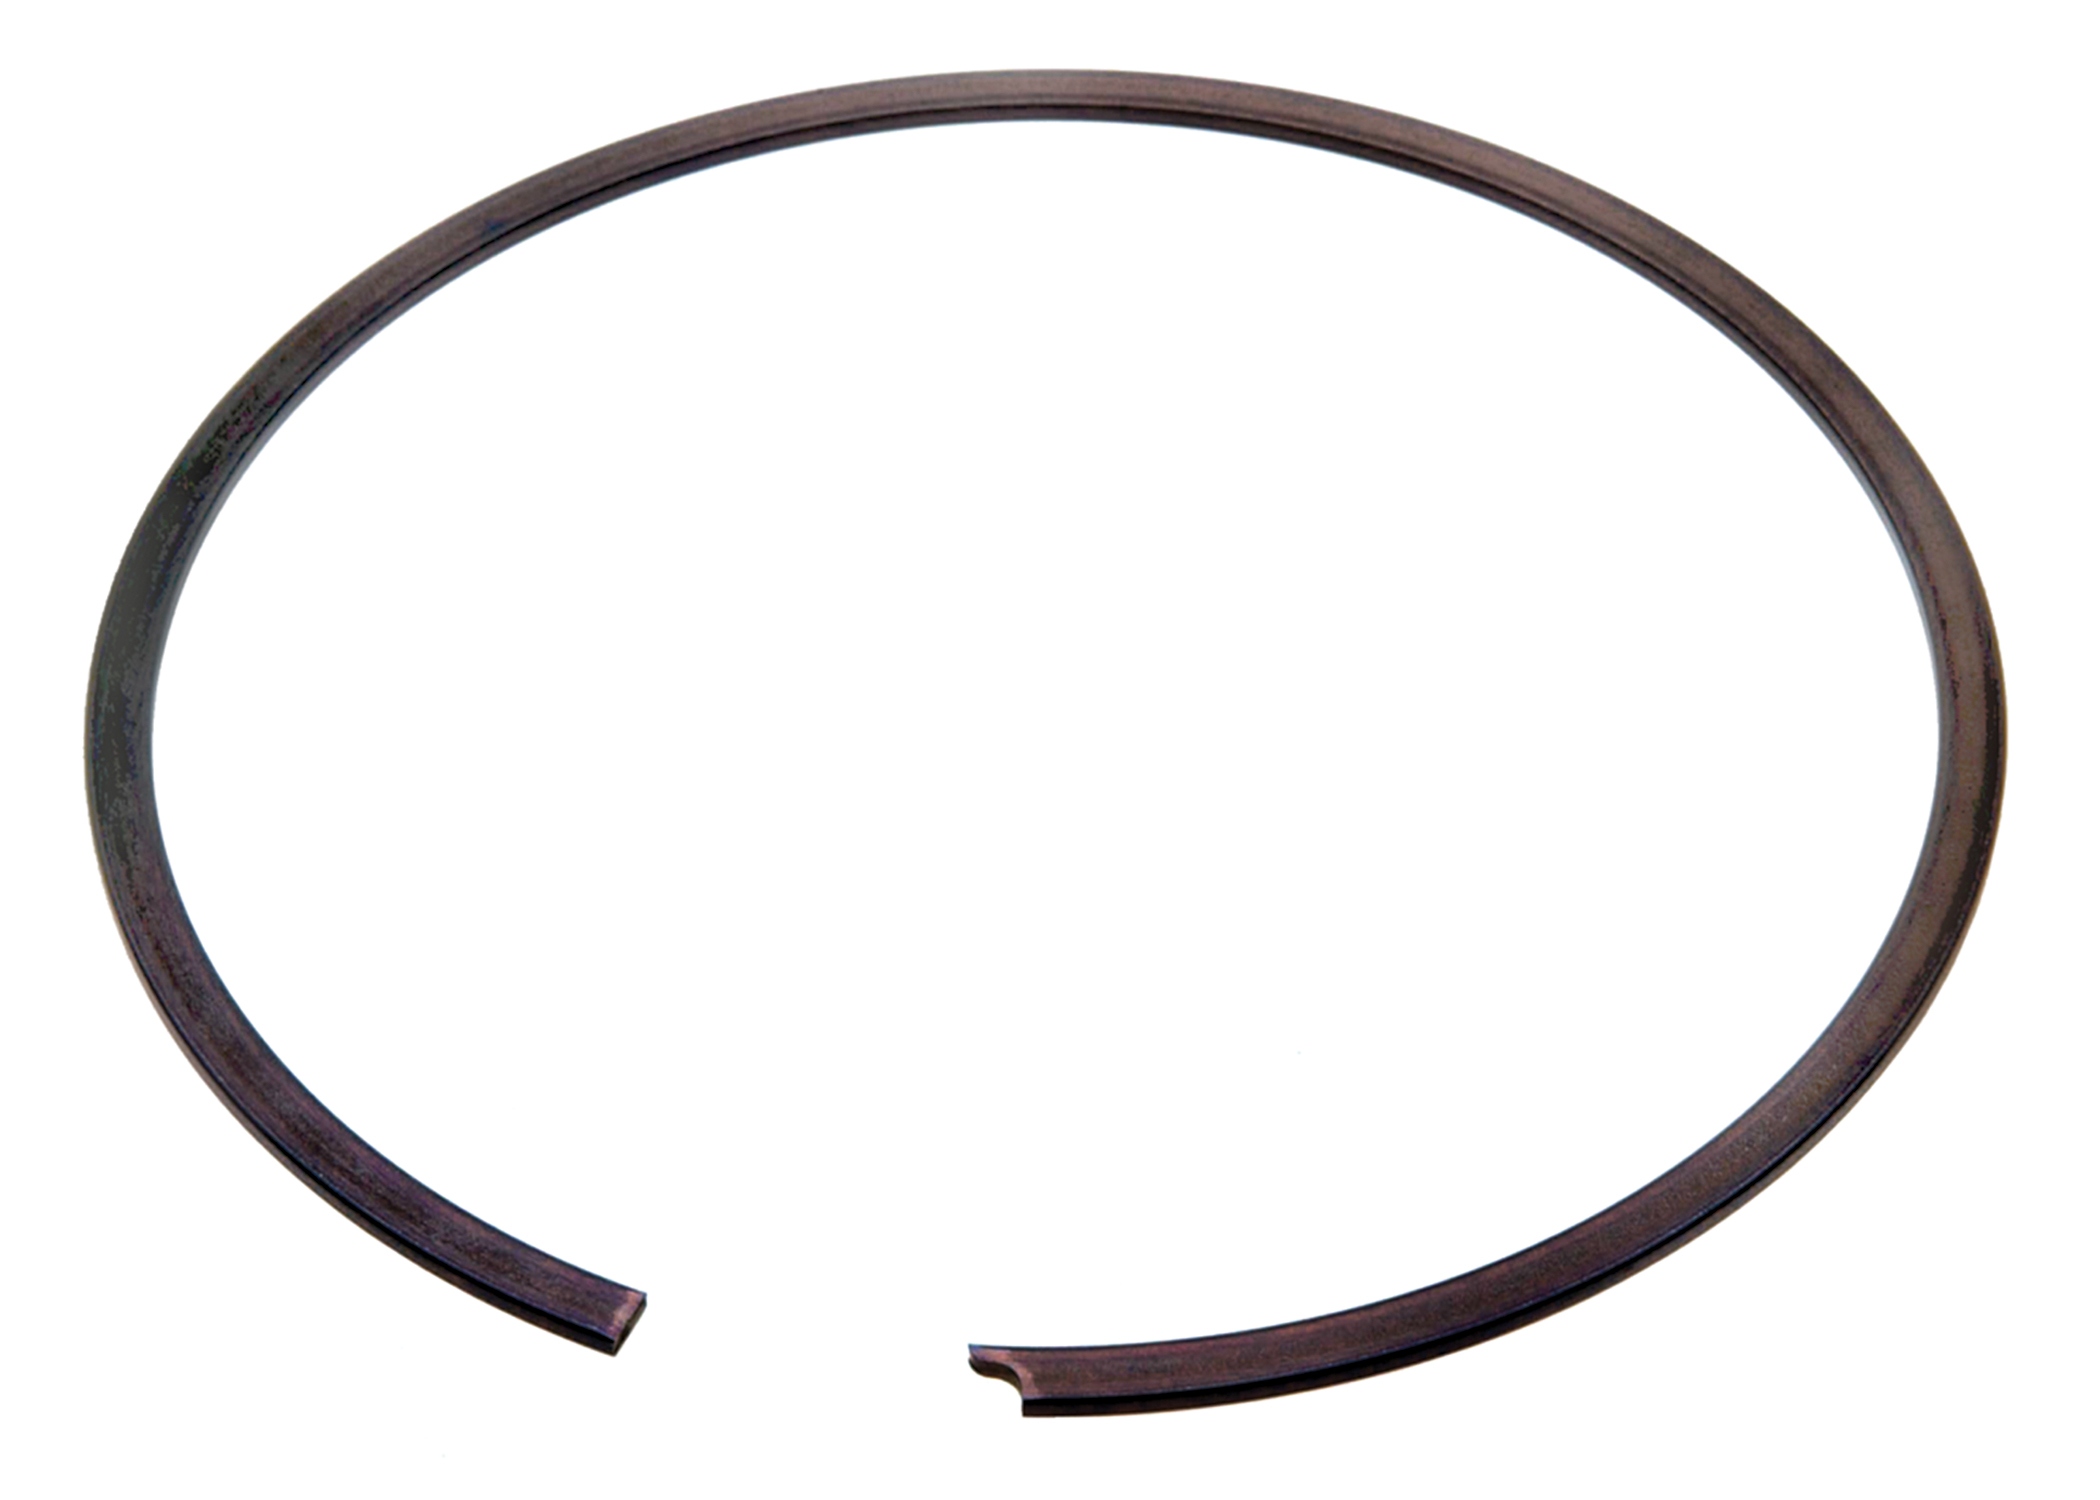 GM GENUINE PARTS - Automatic Transmission Clutch Backing Plate Retaining Ring (3-4) - GMP 8663636